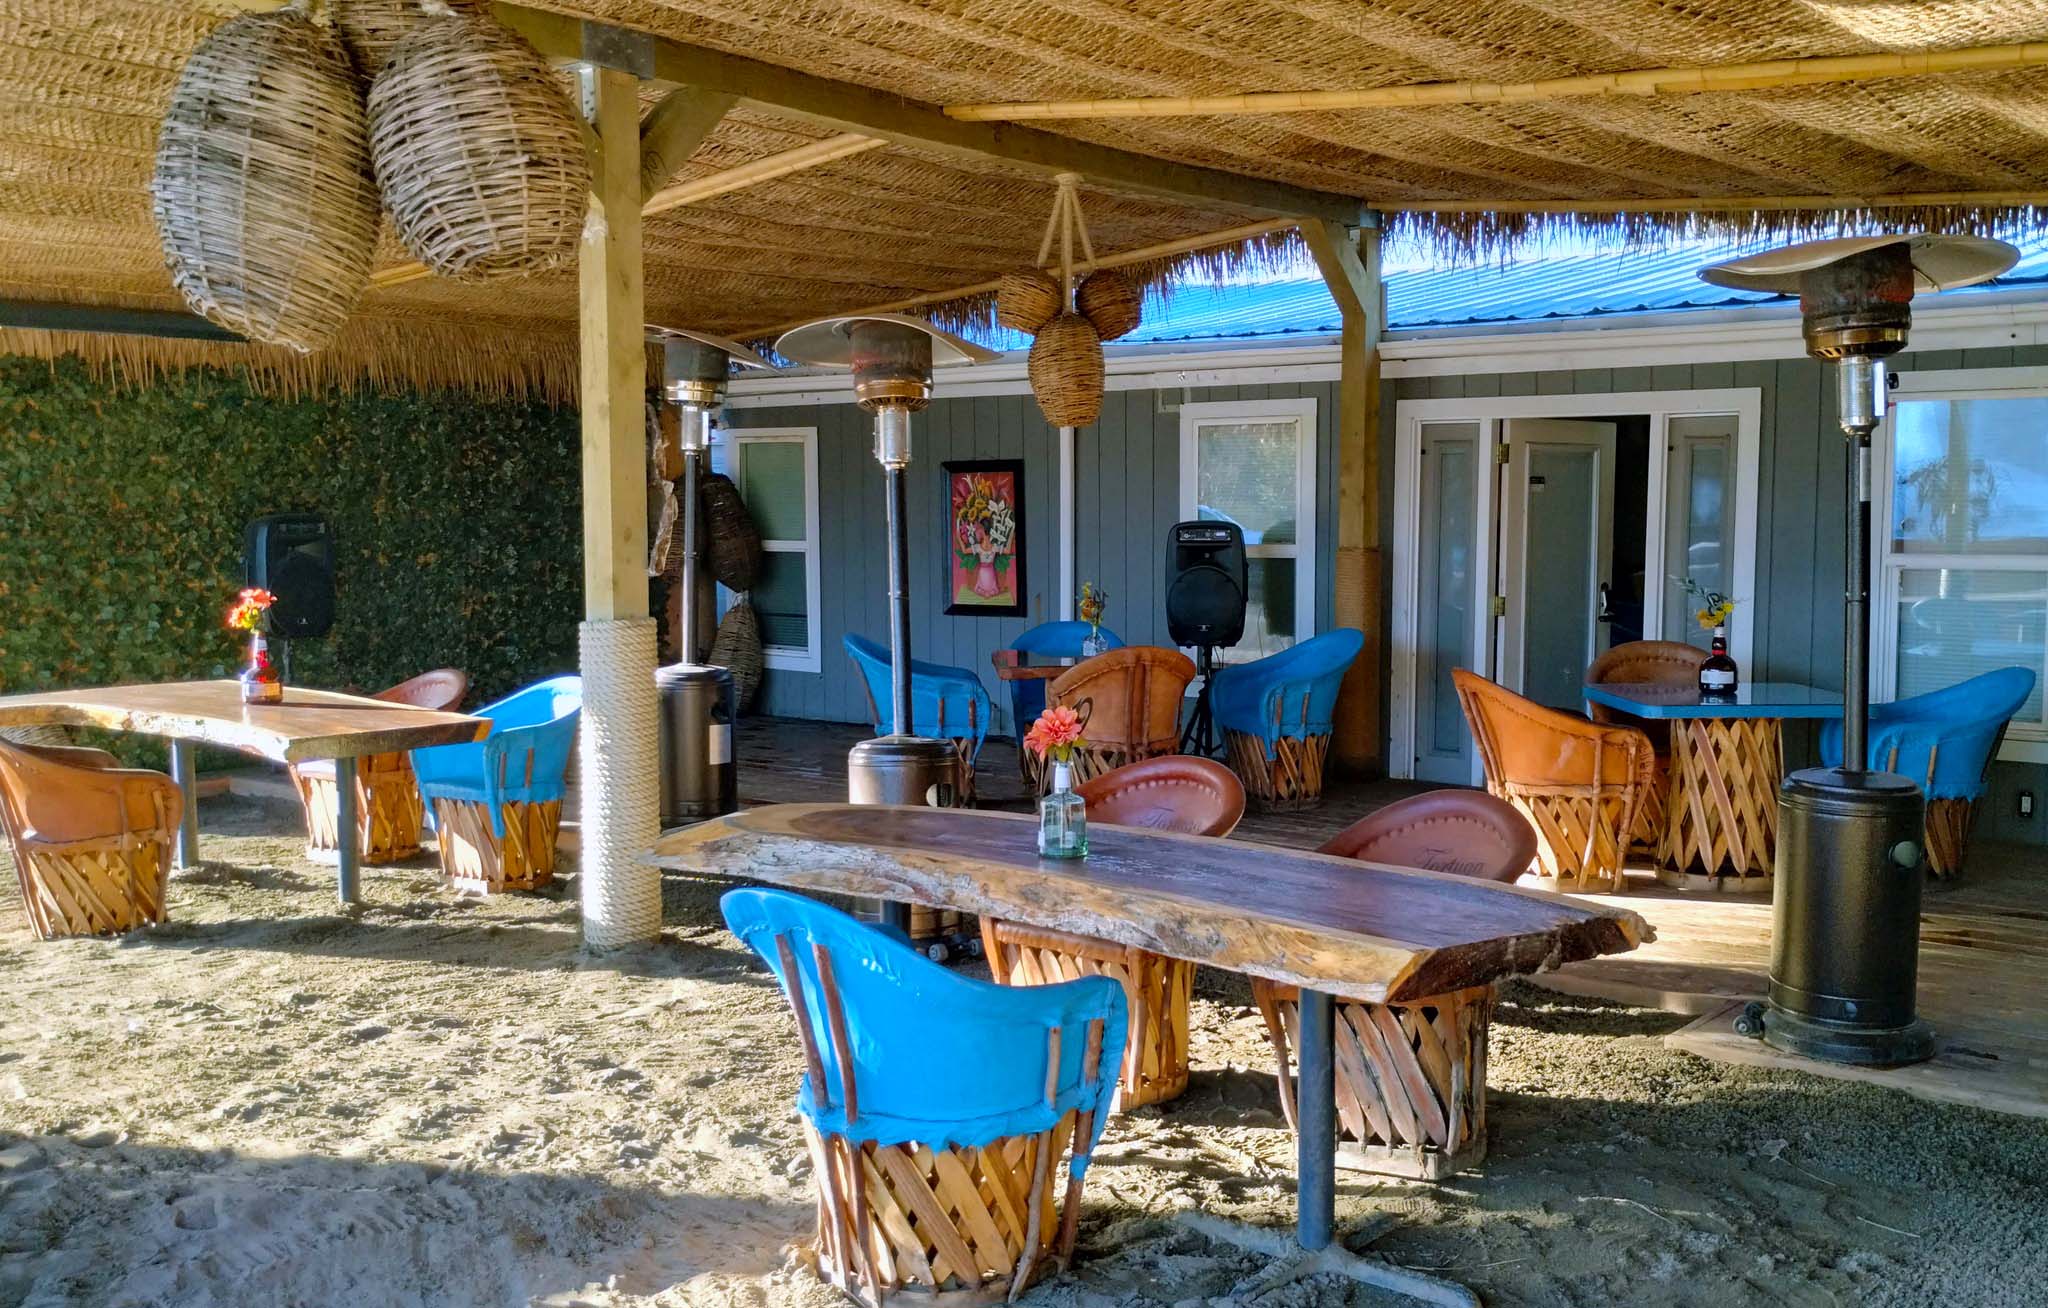 Outdoor dining area at Tortuga Mexican Bar and Grill in Gold Beach, Oregon